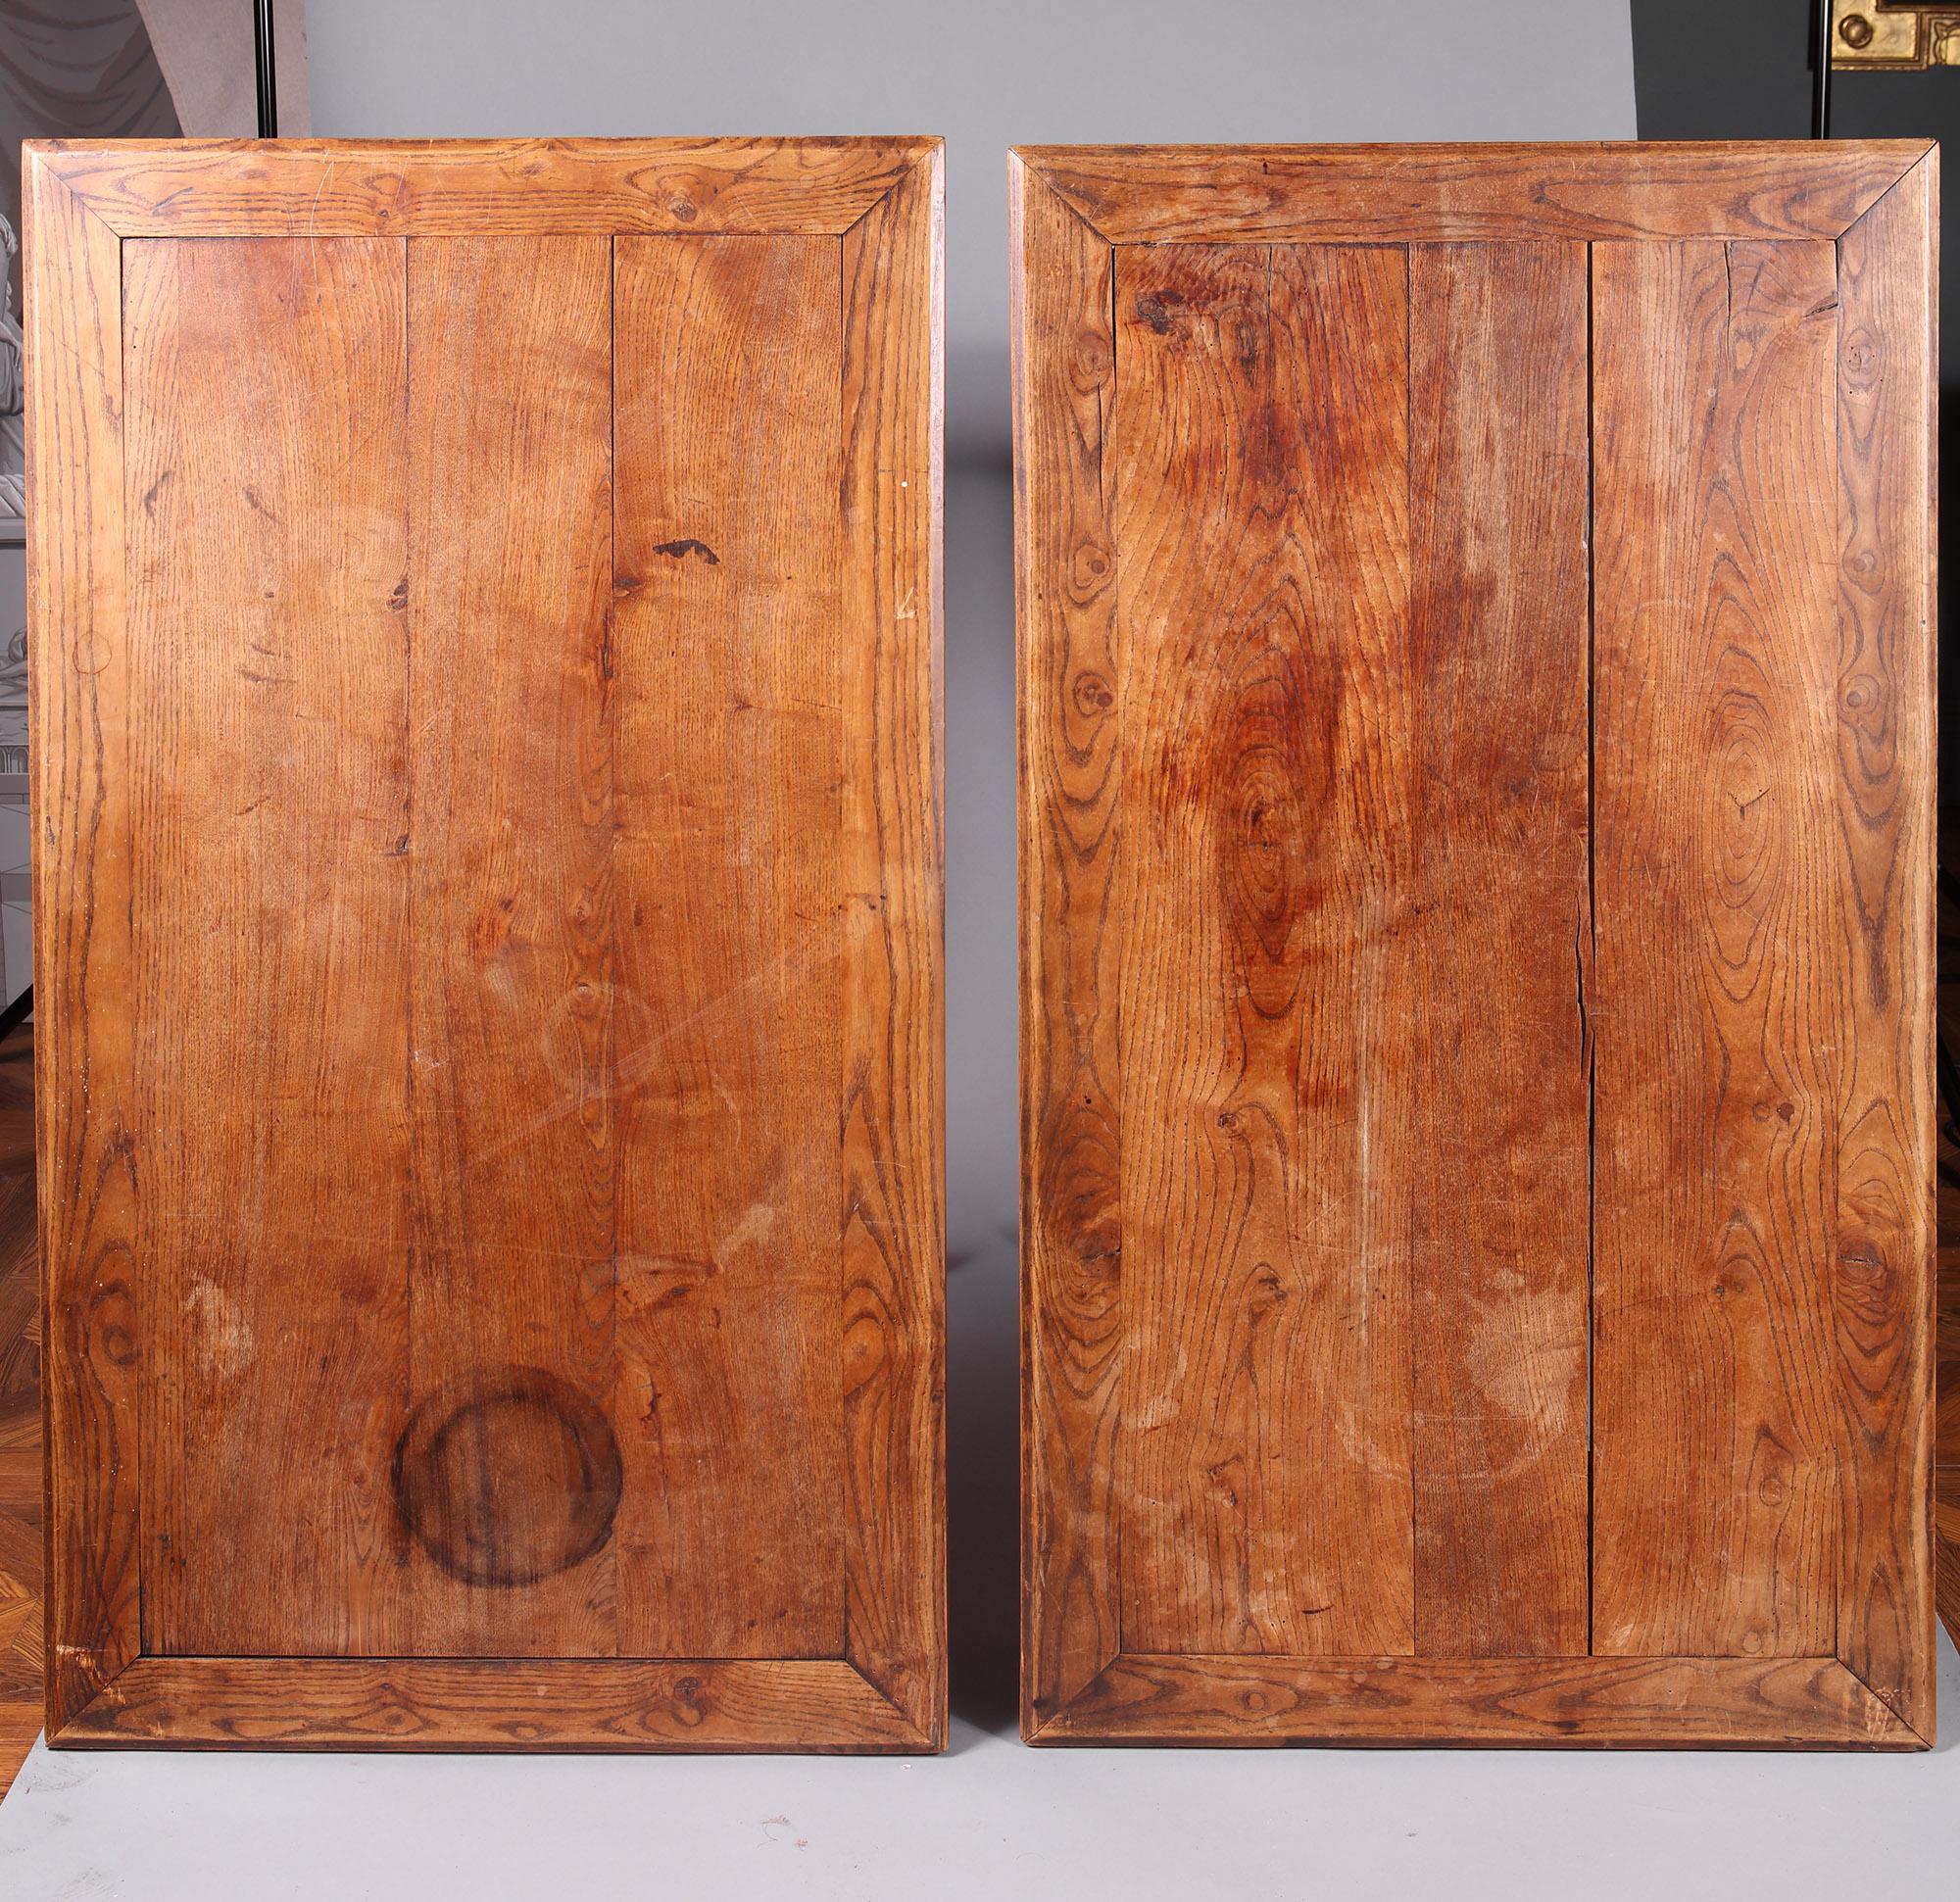 Pair of Arts and Crafts Elm Centre Tables / Side Tables In Good Condition In London, by appointment only